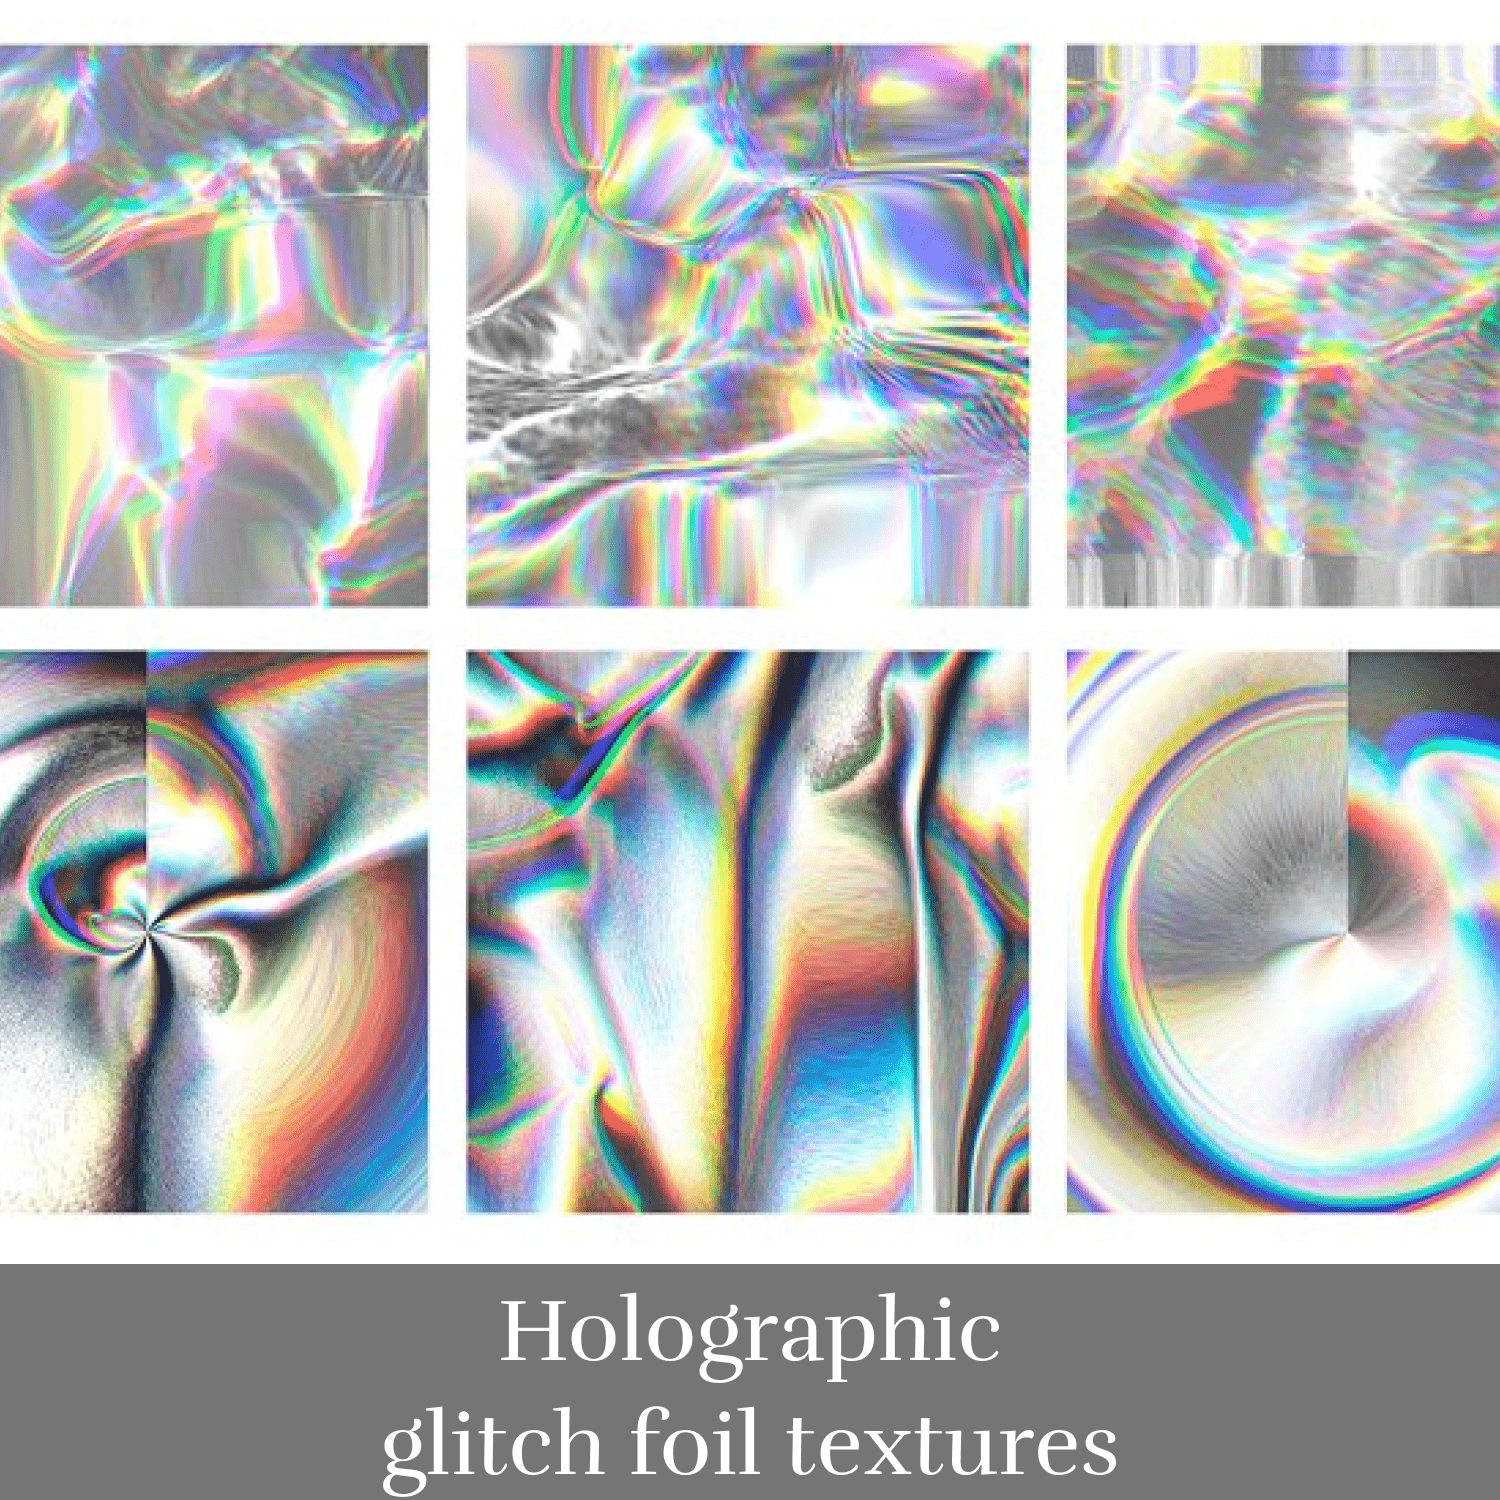 Holographic Glitch Foil Textures - Colorful Examples in Different Positions.